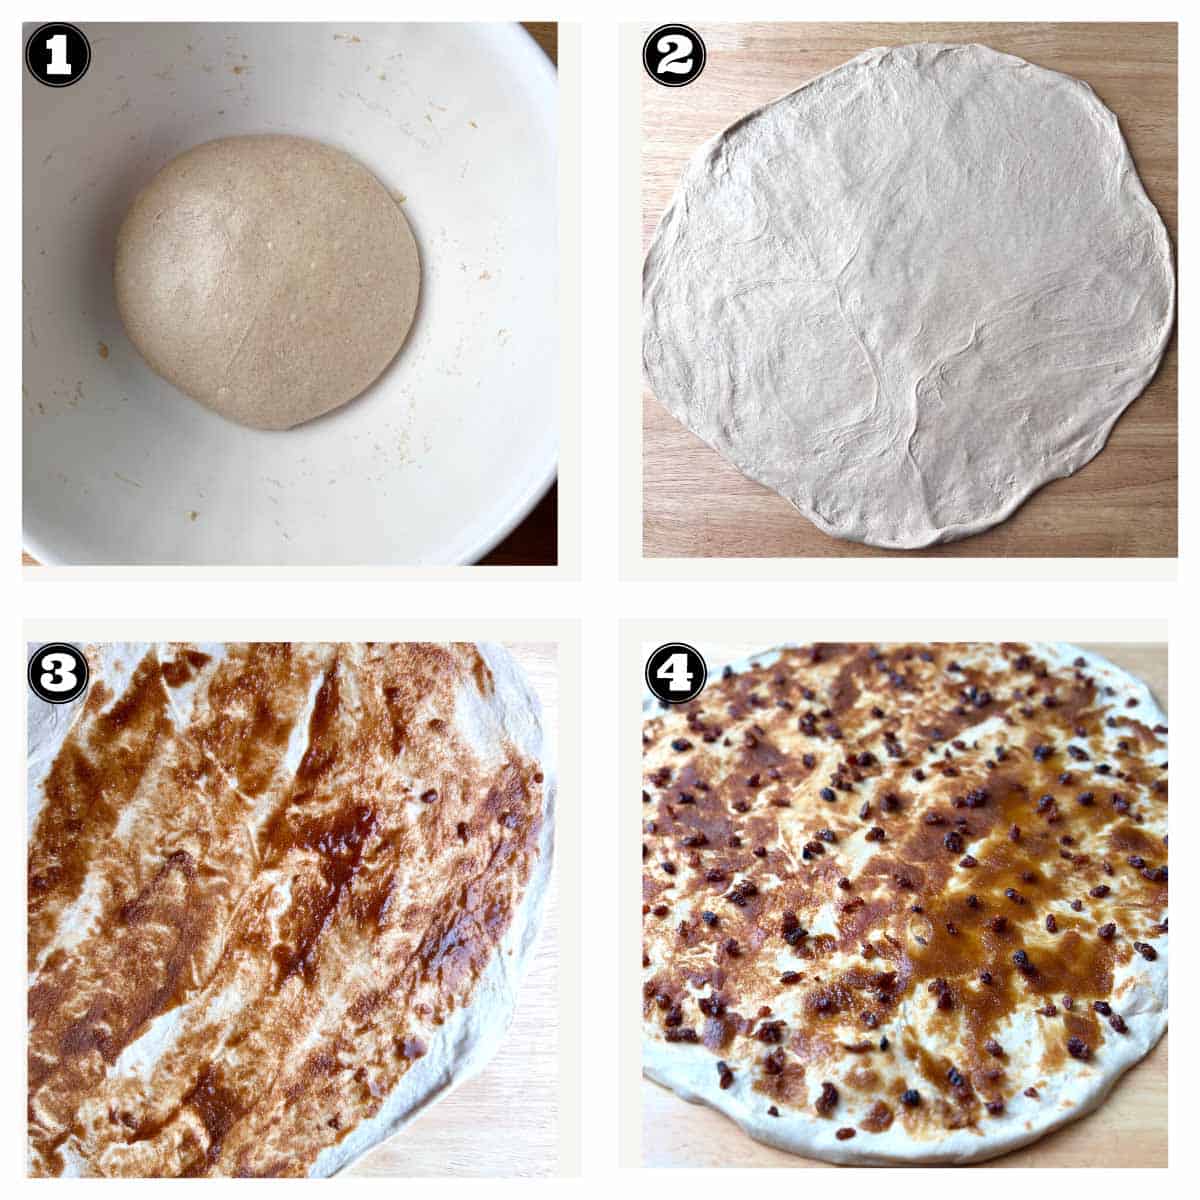 images of stages of spreading a layer of cinnamon sugar butter on the sough sheet